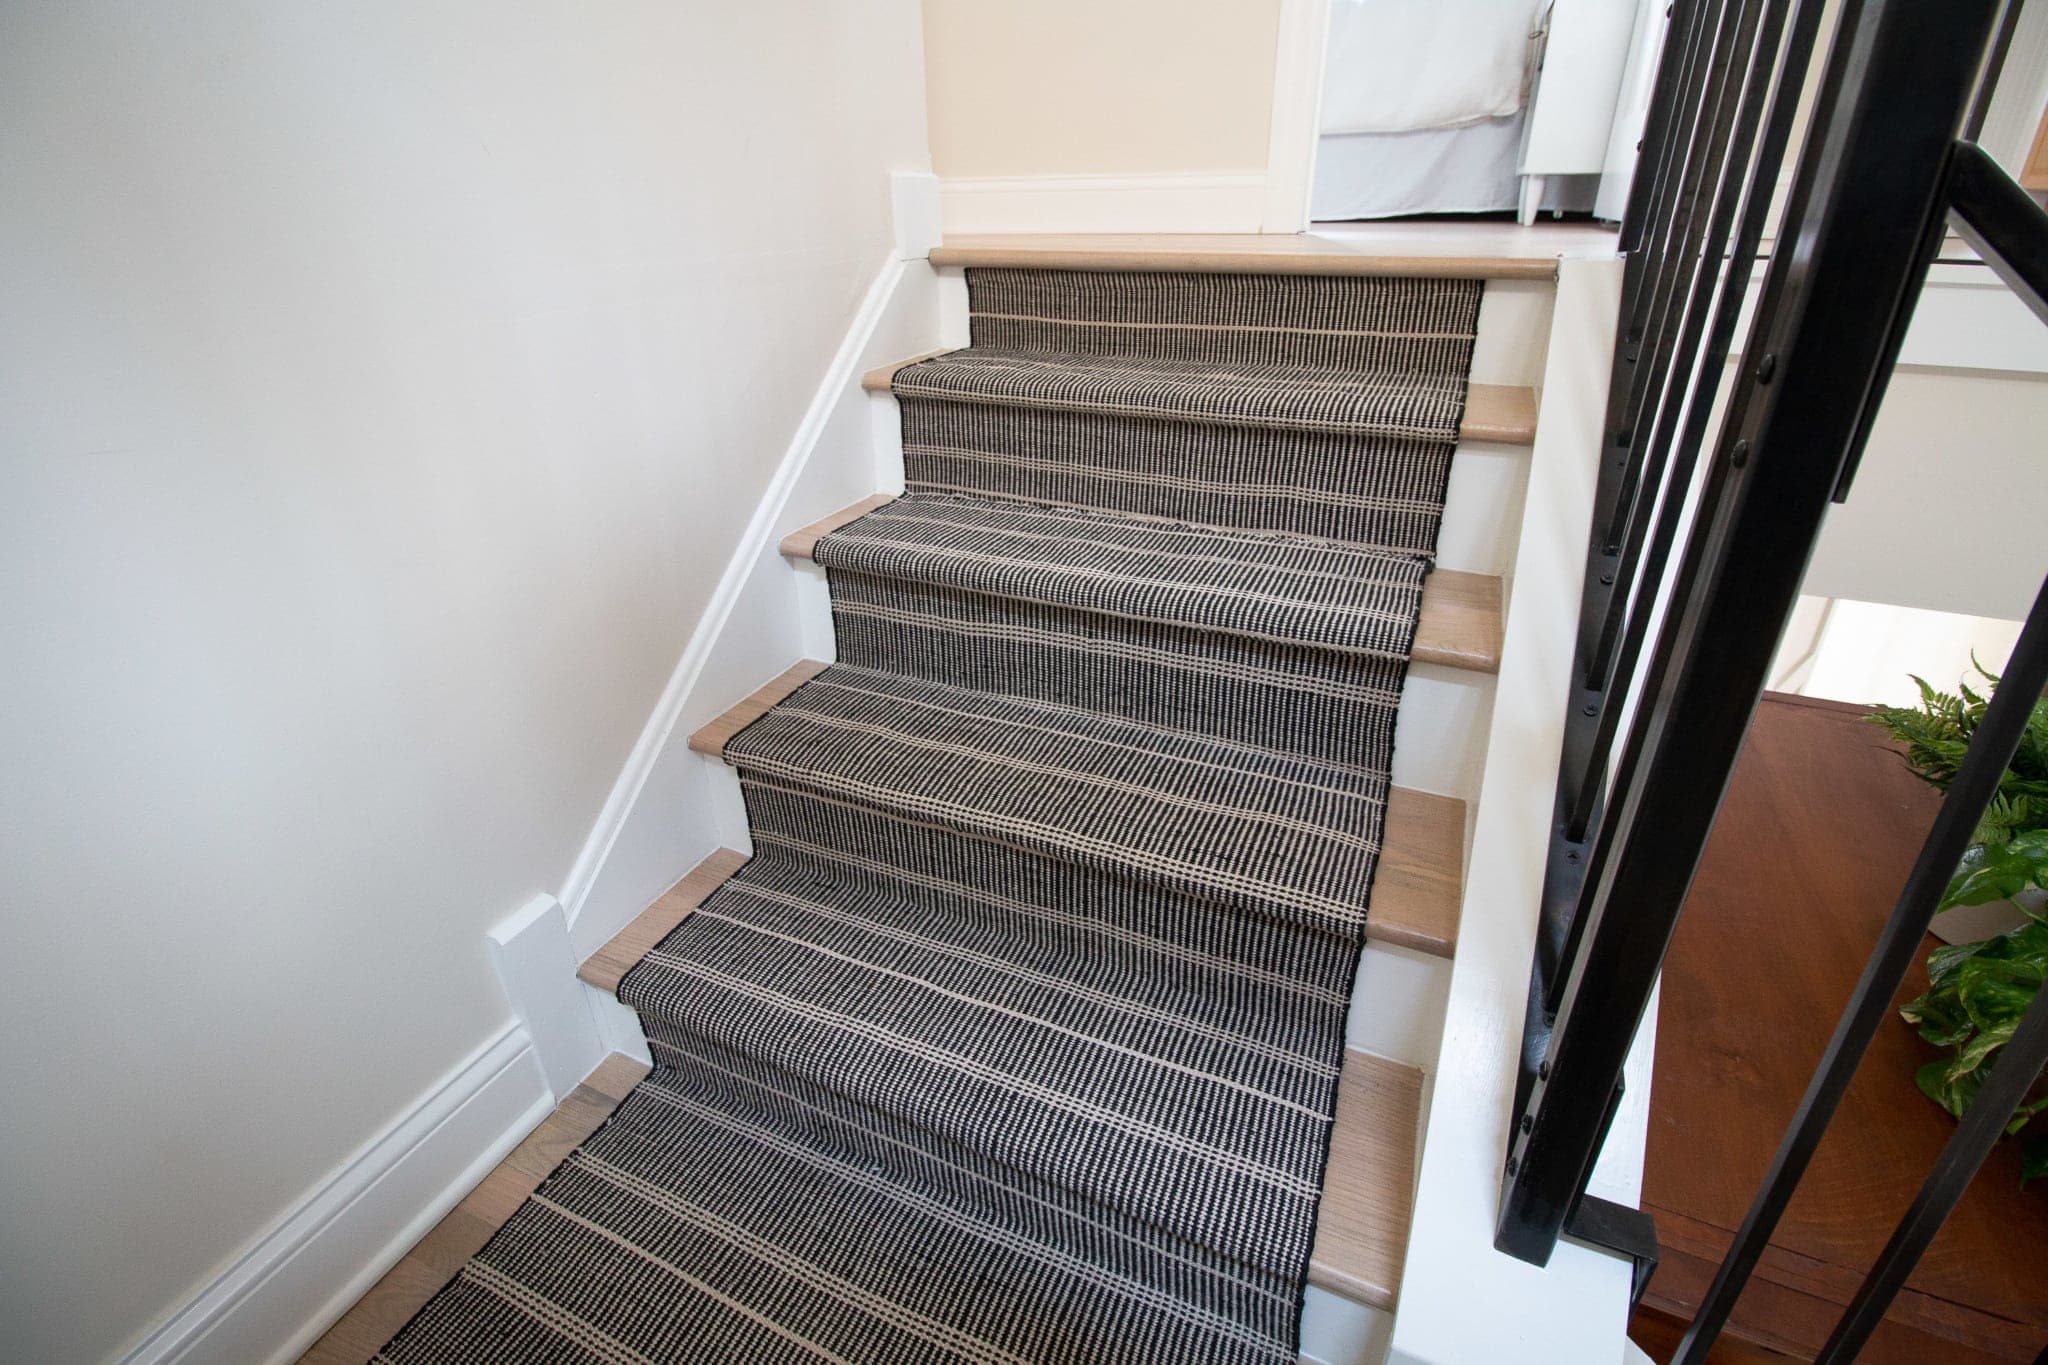 Our new stair runner